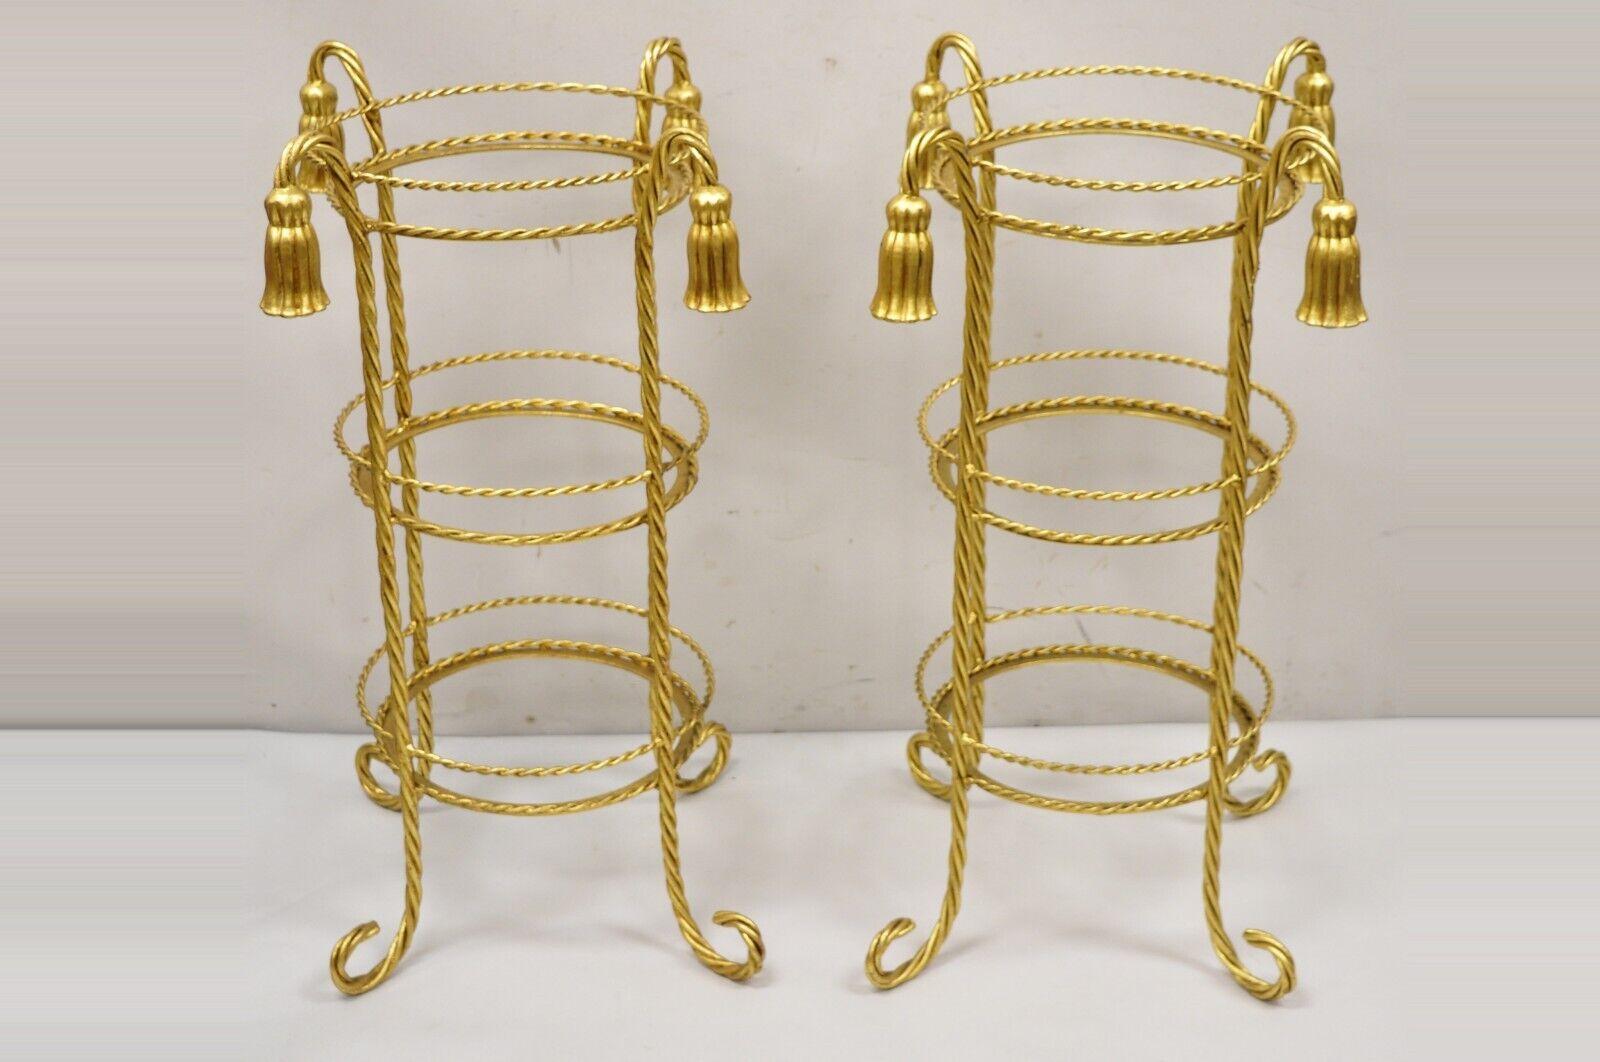 Italian Hollywood Regency 3 Tier Gold Iron Rope Tassel Stand Side Tables, Pair For Sale 7